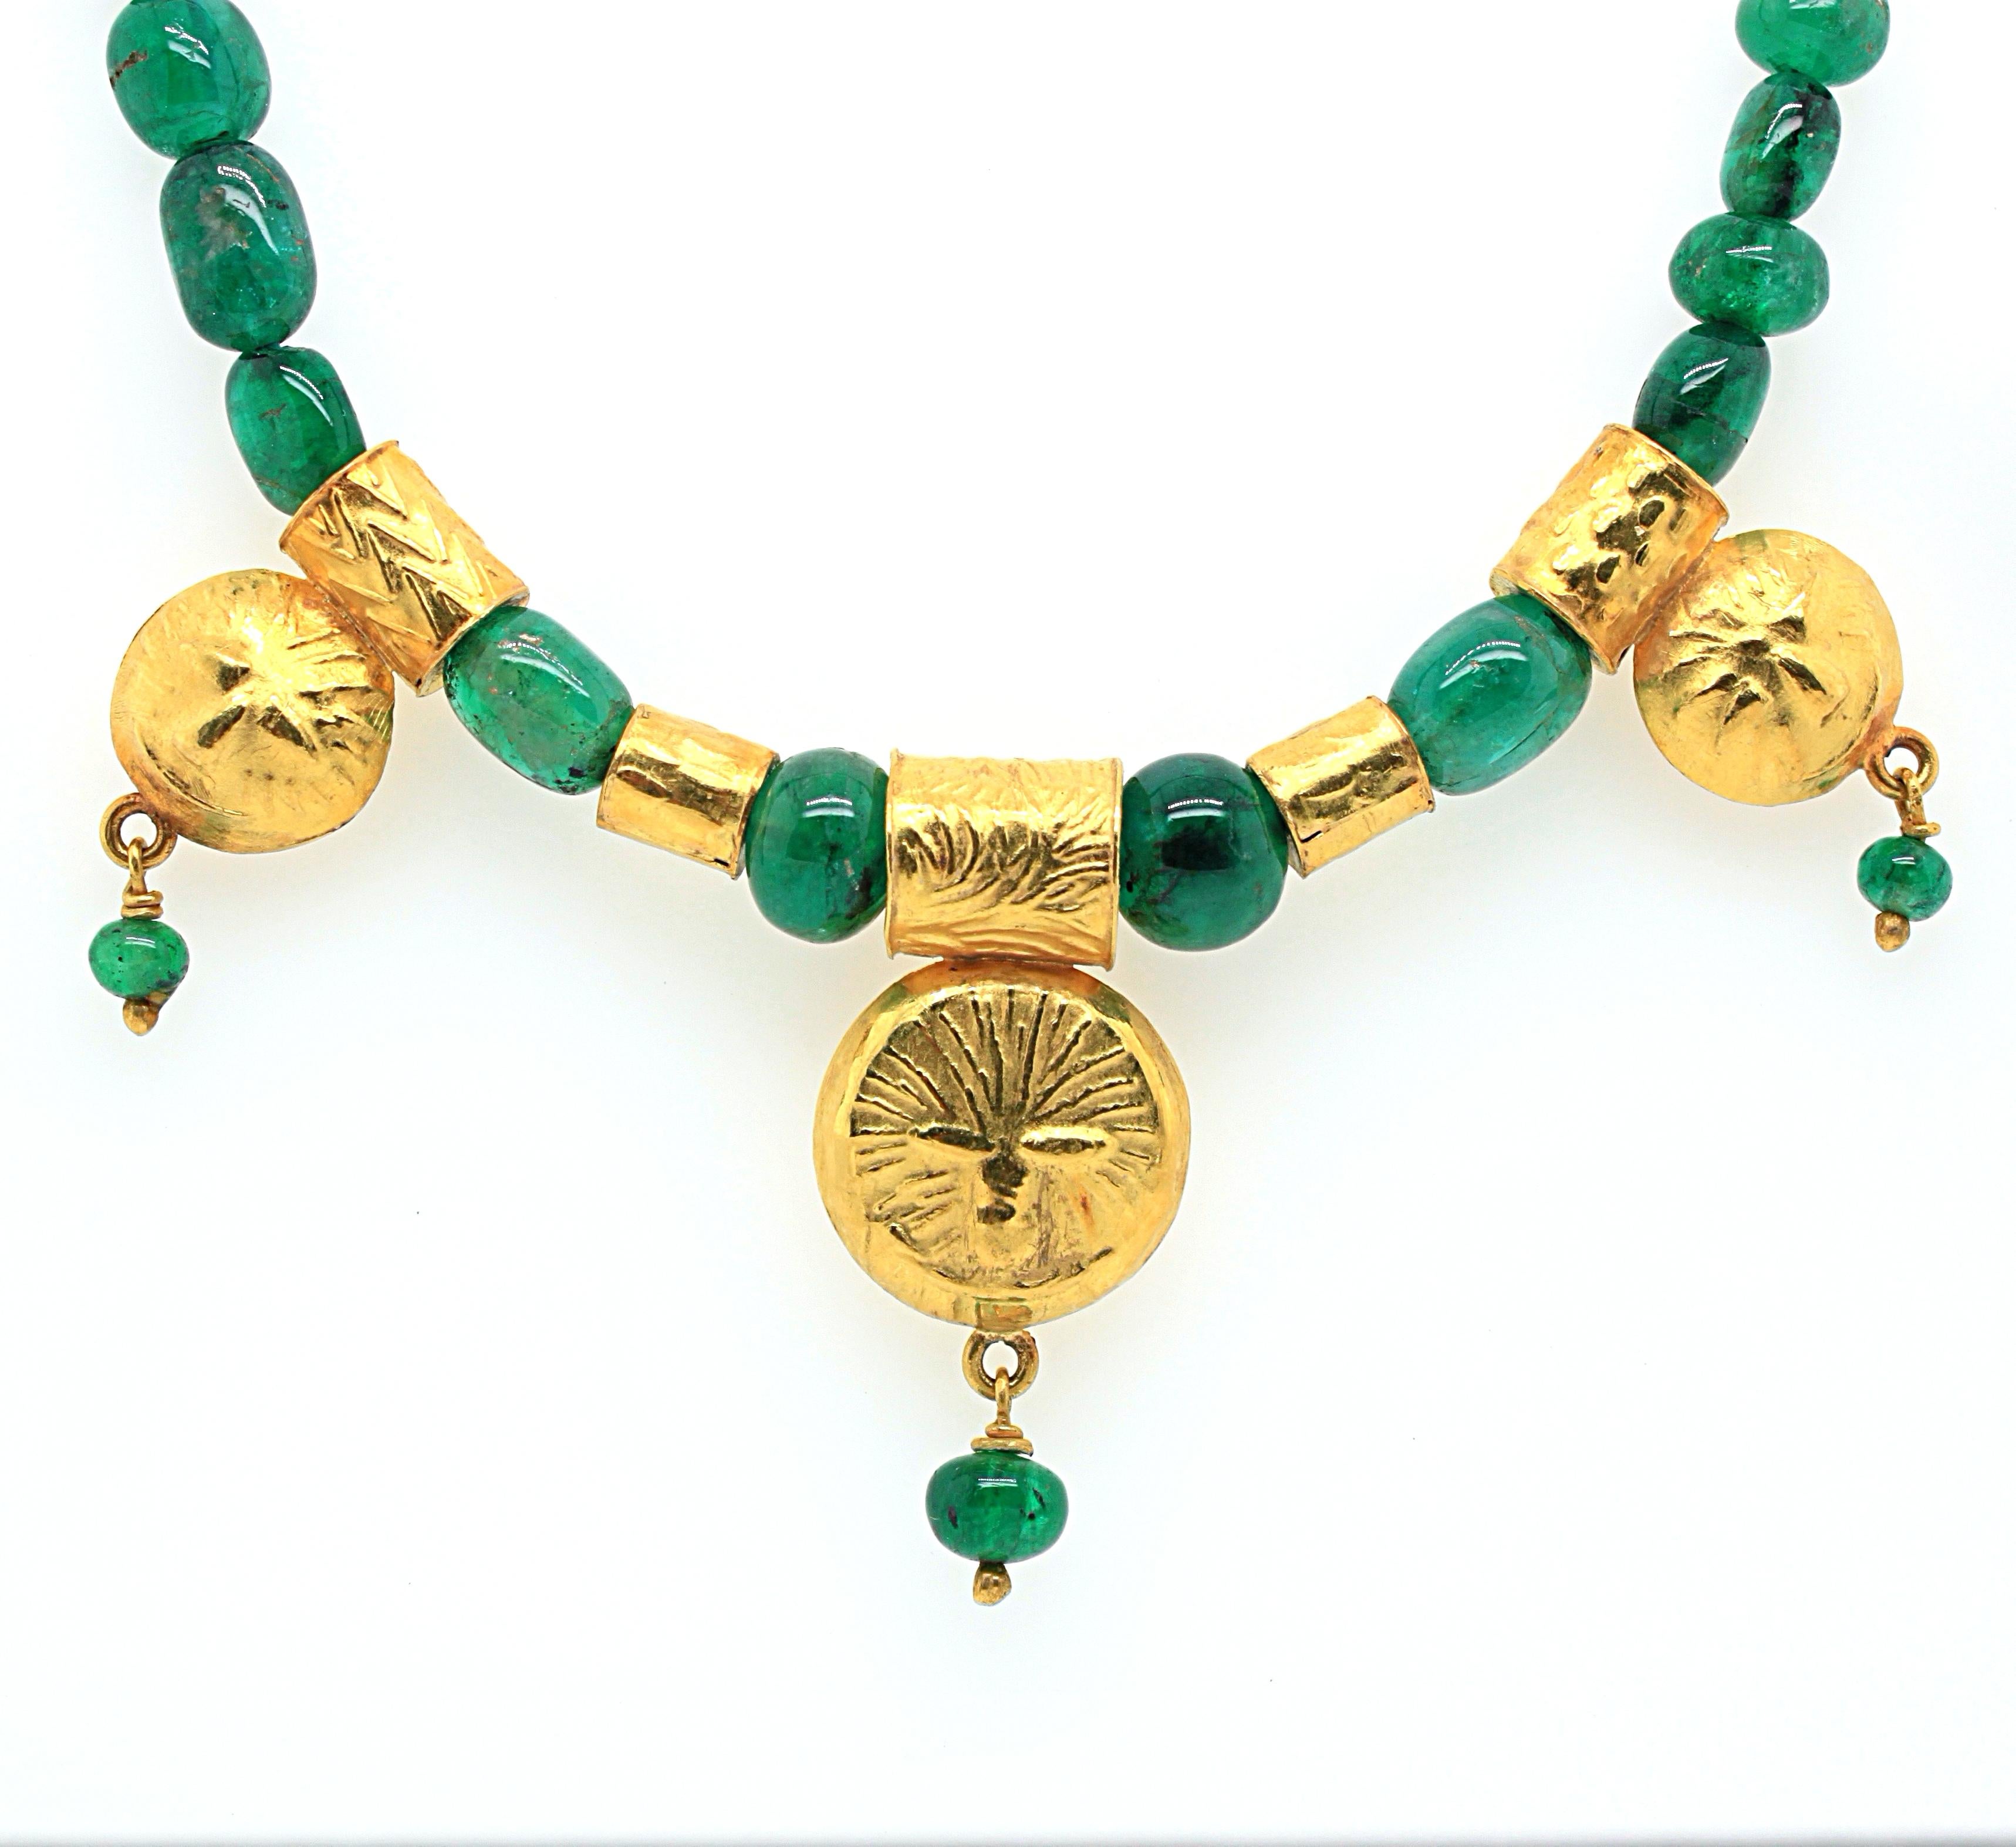 An emerald bead and 18k yellow gold necklace by Atelier Dix. The old mine emeralds have a beautiful strong green colour and are round and oval shaped beads, weighing approximately 90 carats in total. The necklace centre features five golden parts